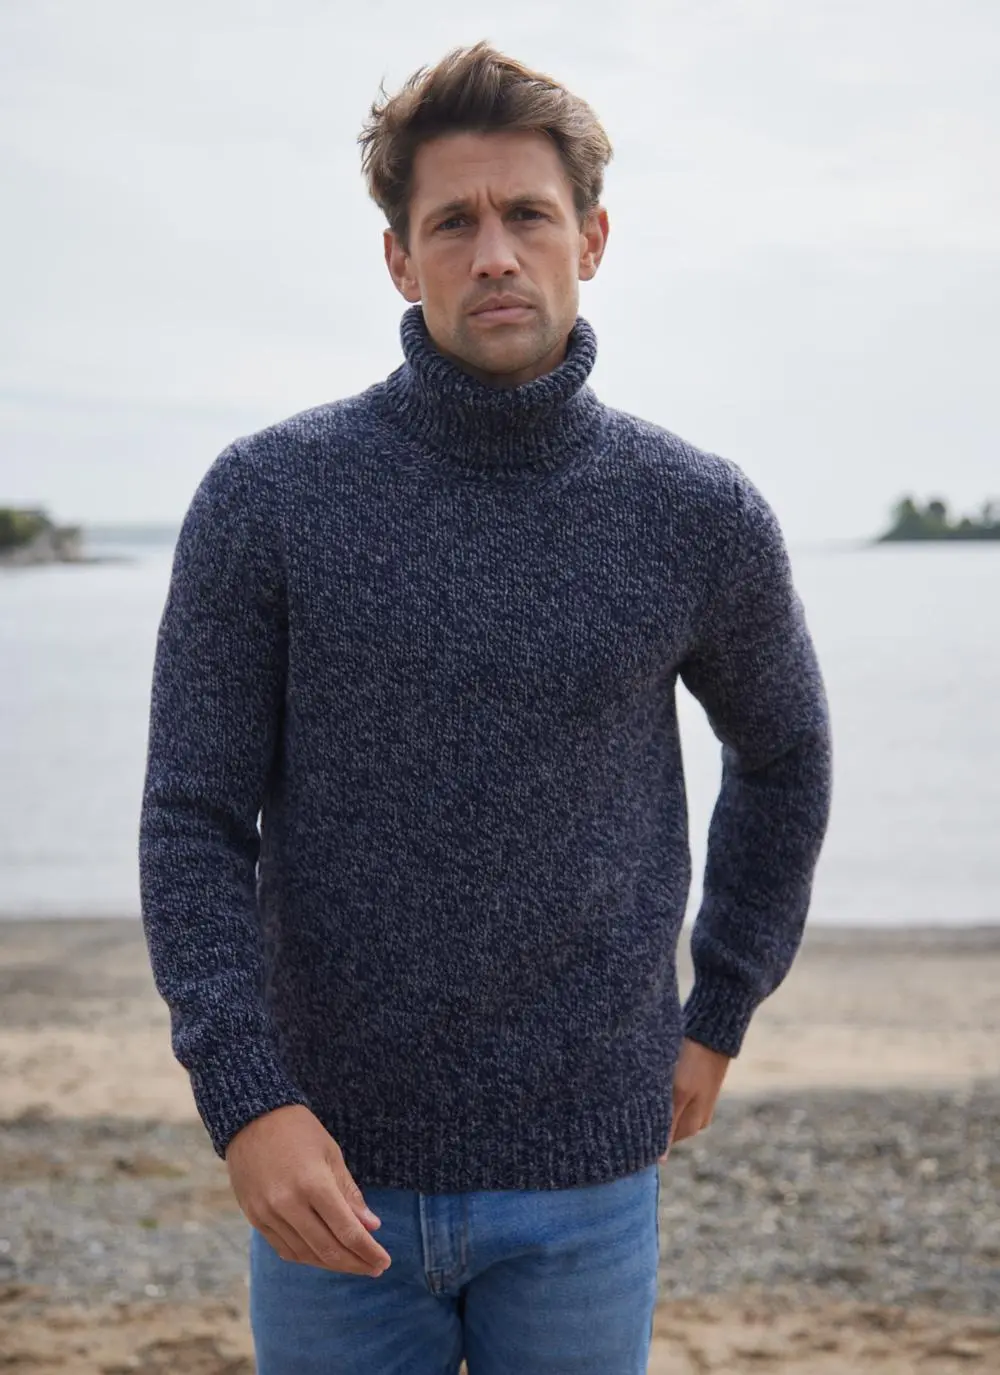 Fisherman Chunky Marled Polo Neck Sweater with Cashmere in Indigo Grey ...